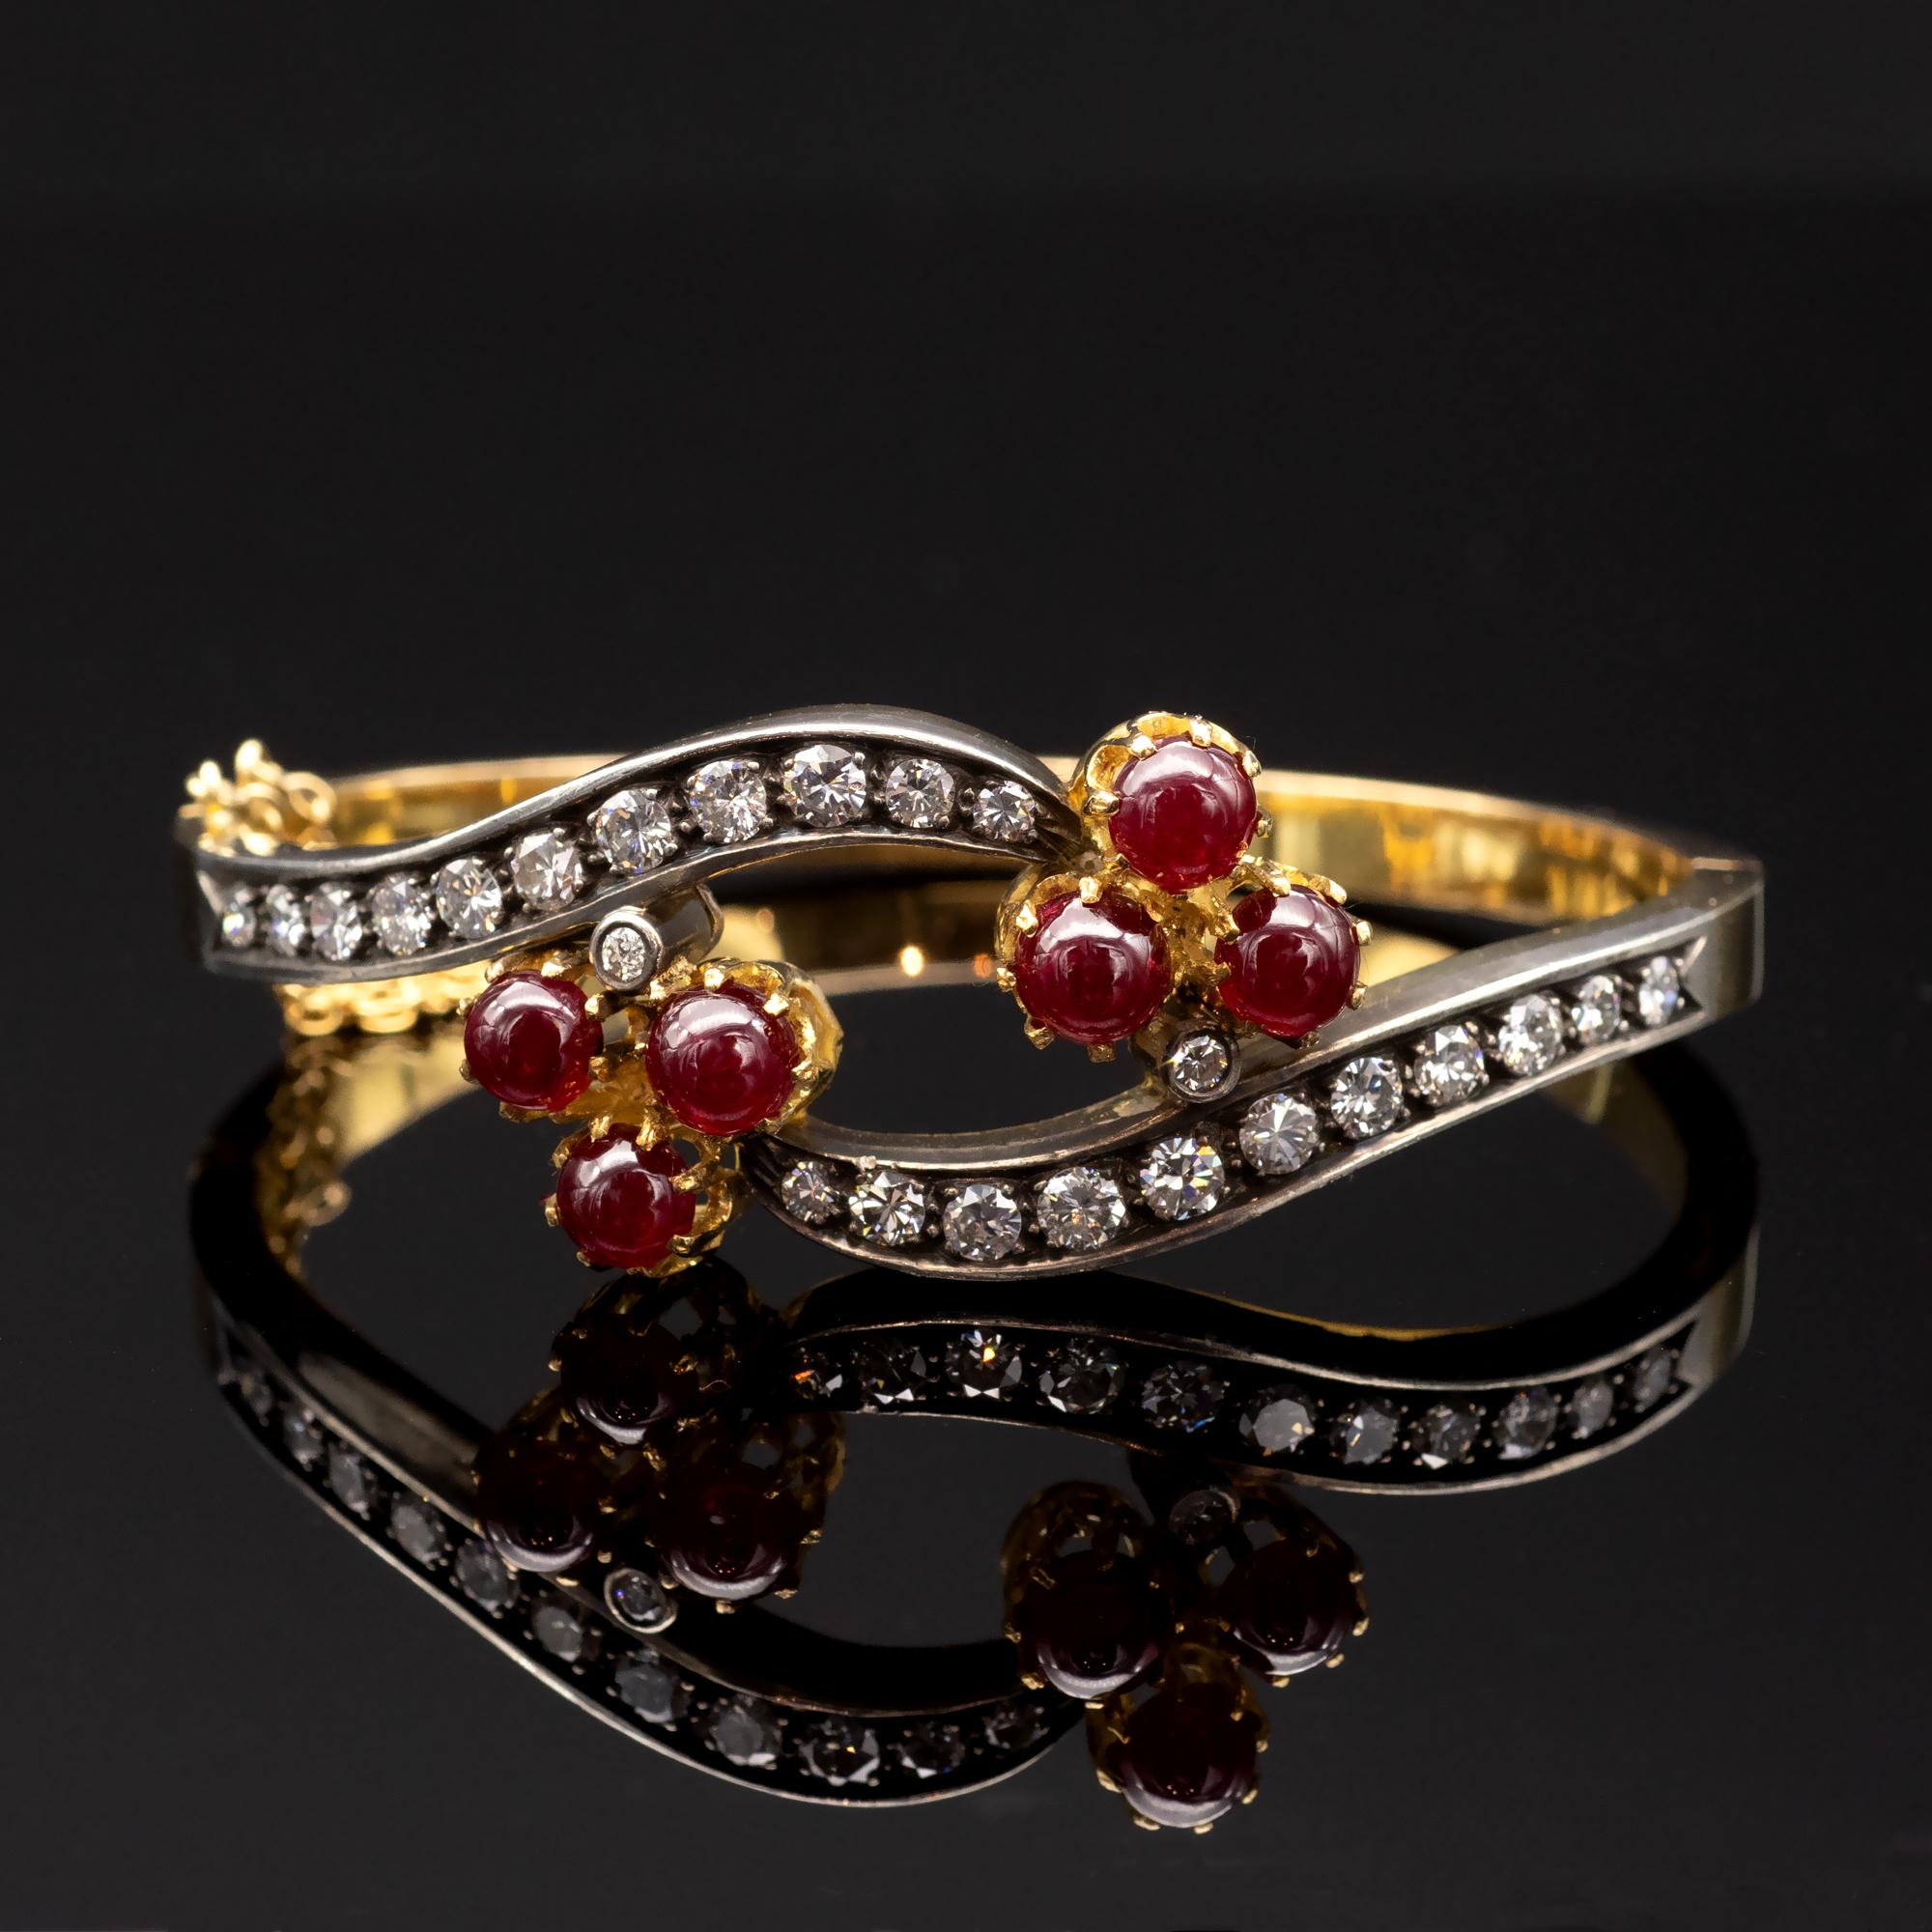 Indulge in luxurious elegance with this exquisite antique bracelet, crafted from 18-Kt Gold and embellished with 24 top-quality white diamonds and 6 gorgeous cabochon rubies totaling approximately 8 carats. 
The diamonds are set atop a thin layer of